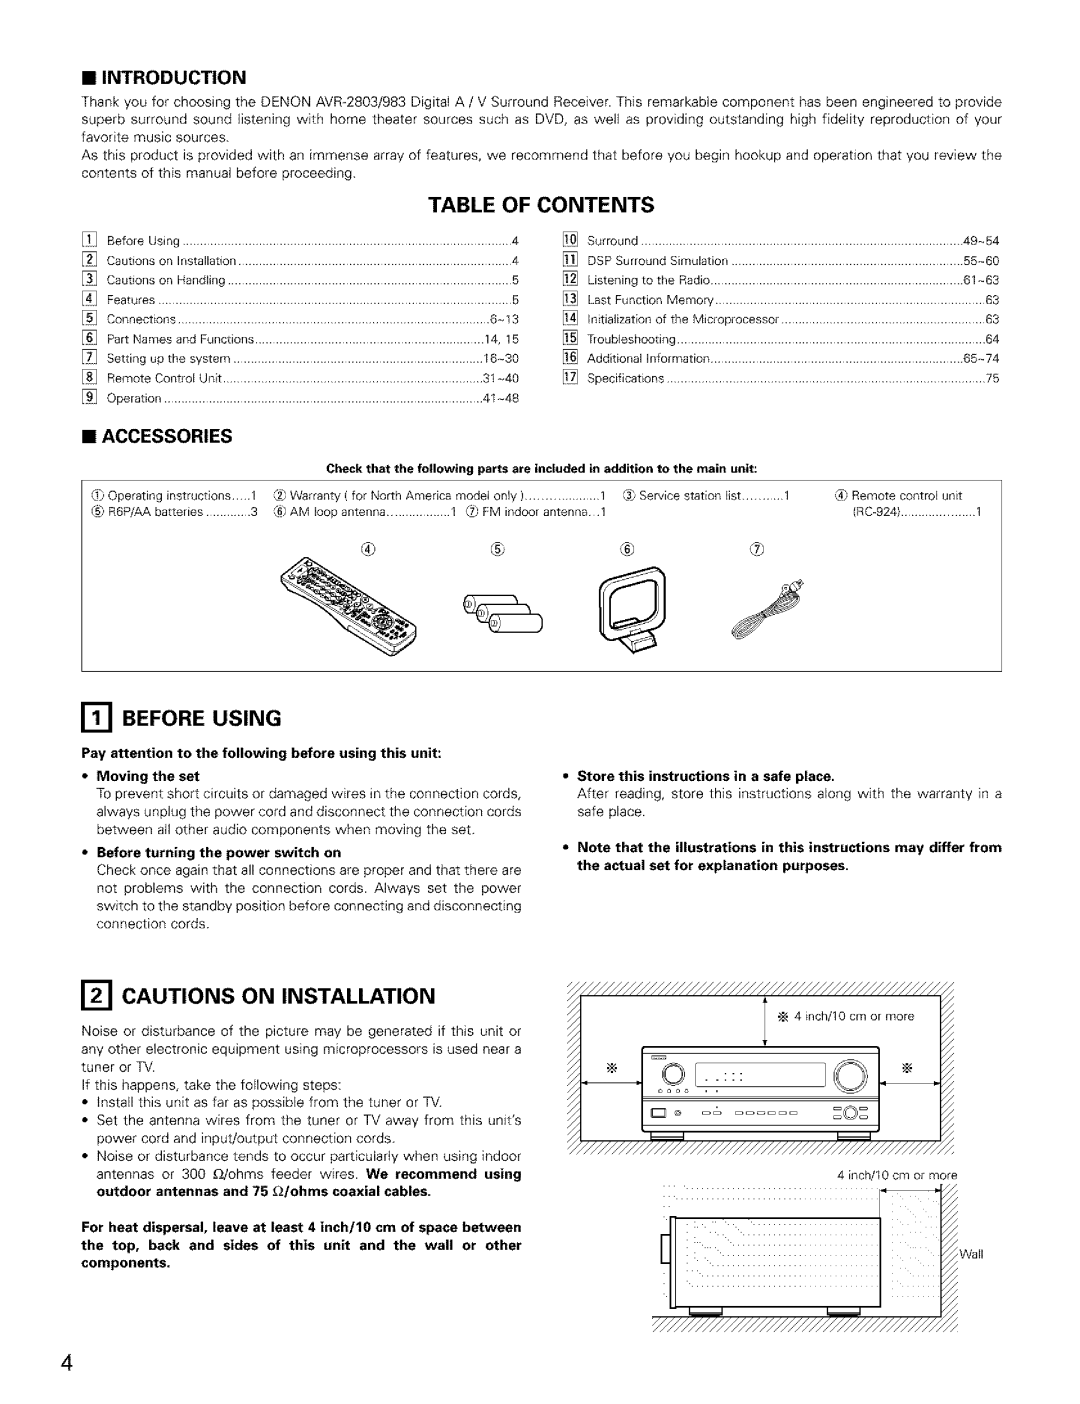 Denon AVR-2803/983 Table Of Contents, Before Using, Cautions On Installation, •Introduction, •Accessories, •Moving the set 